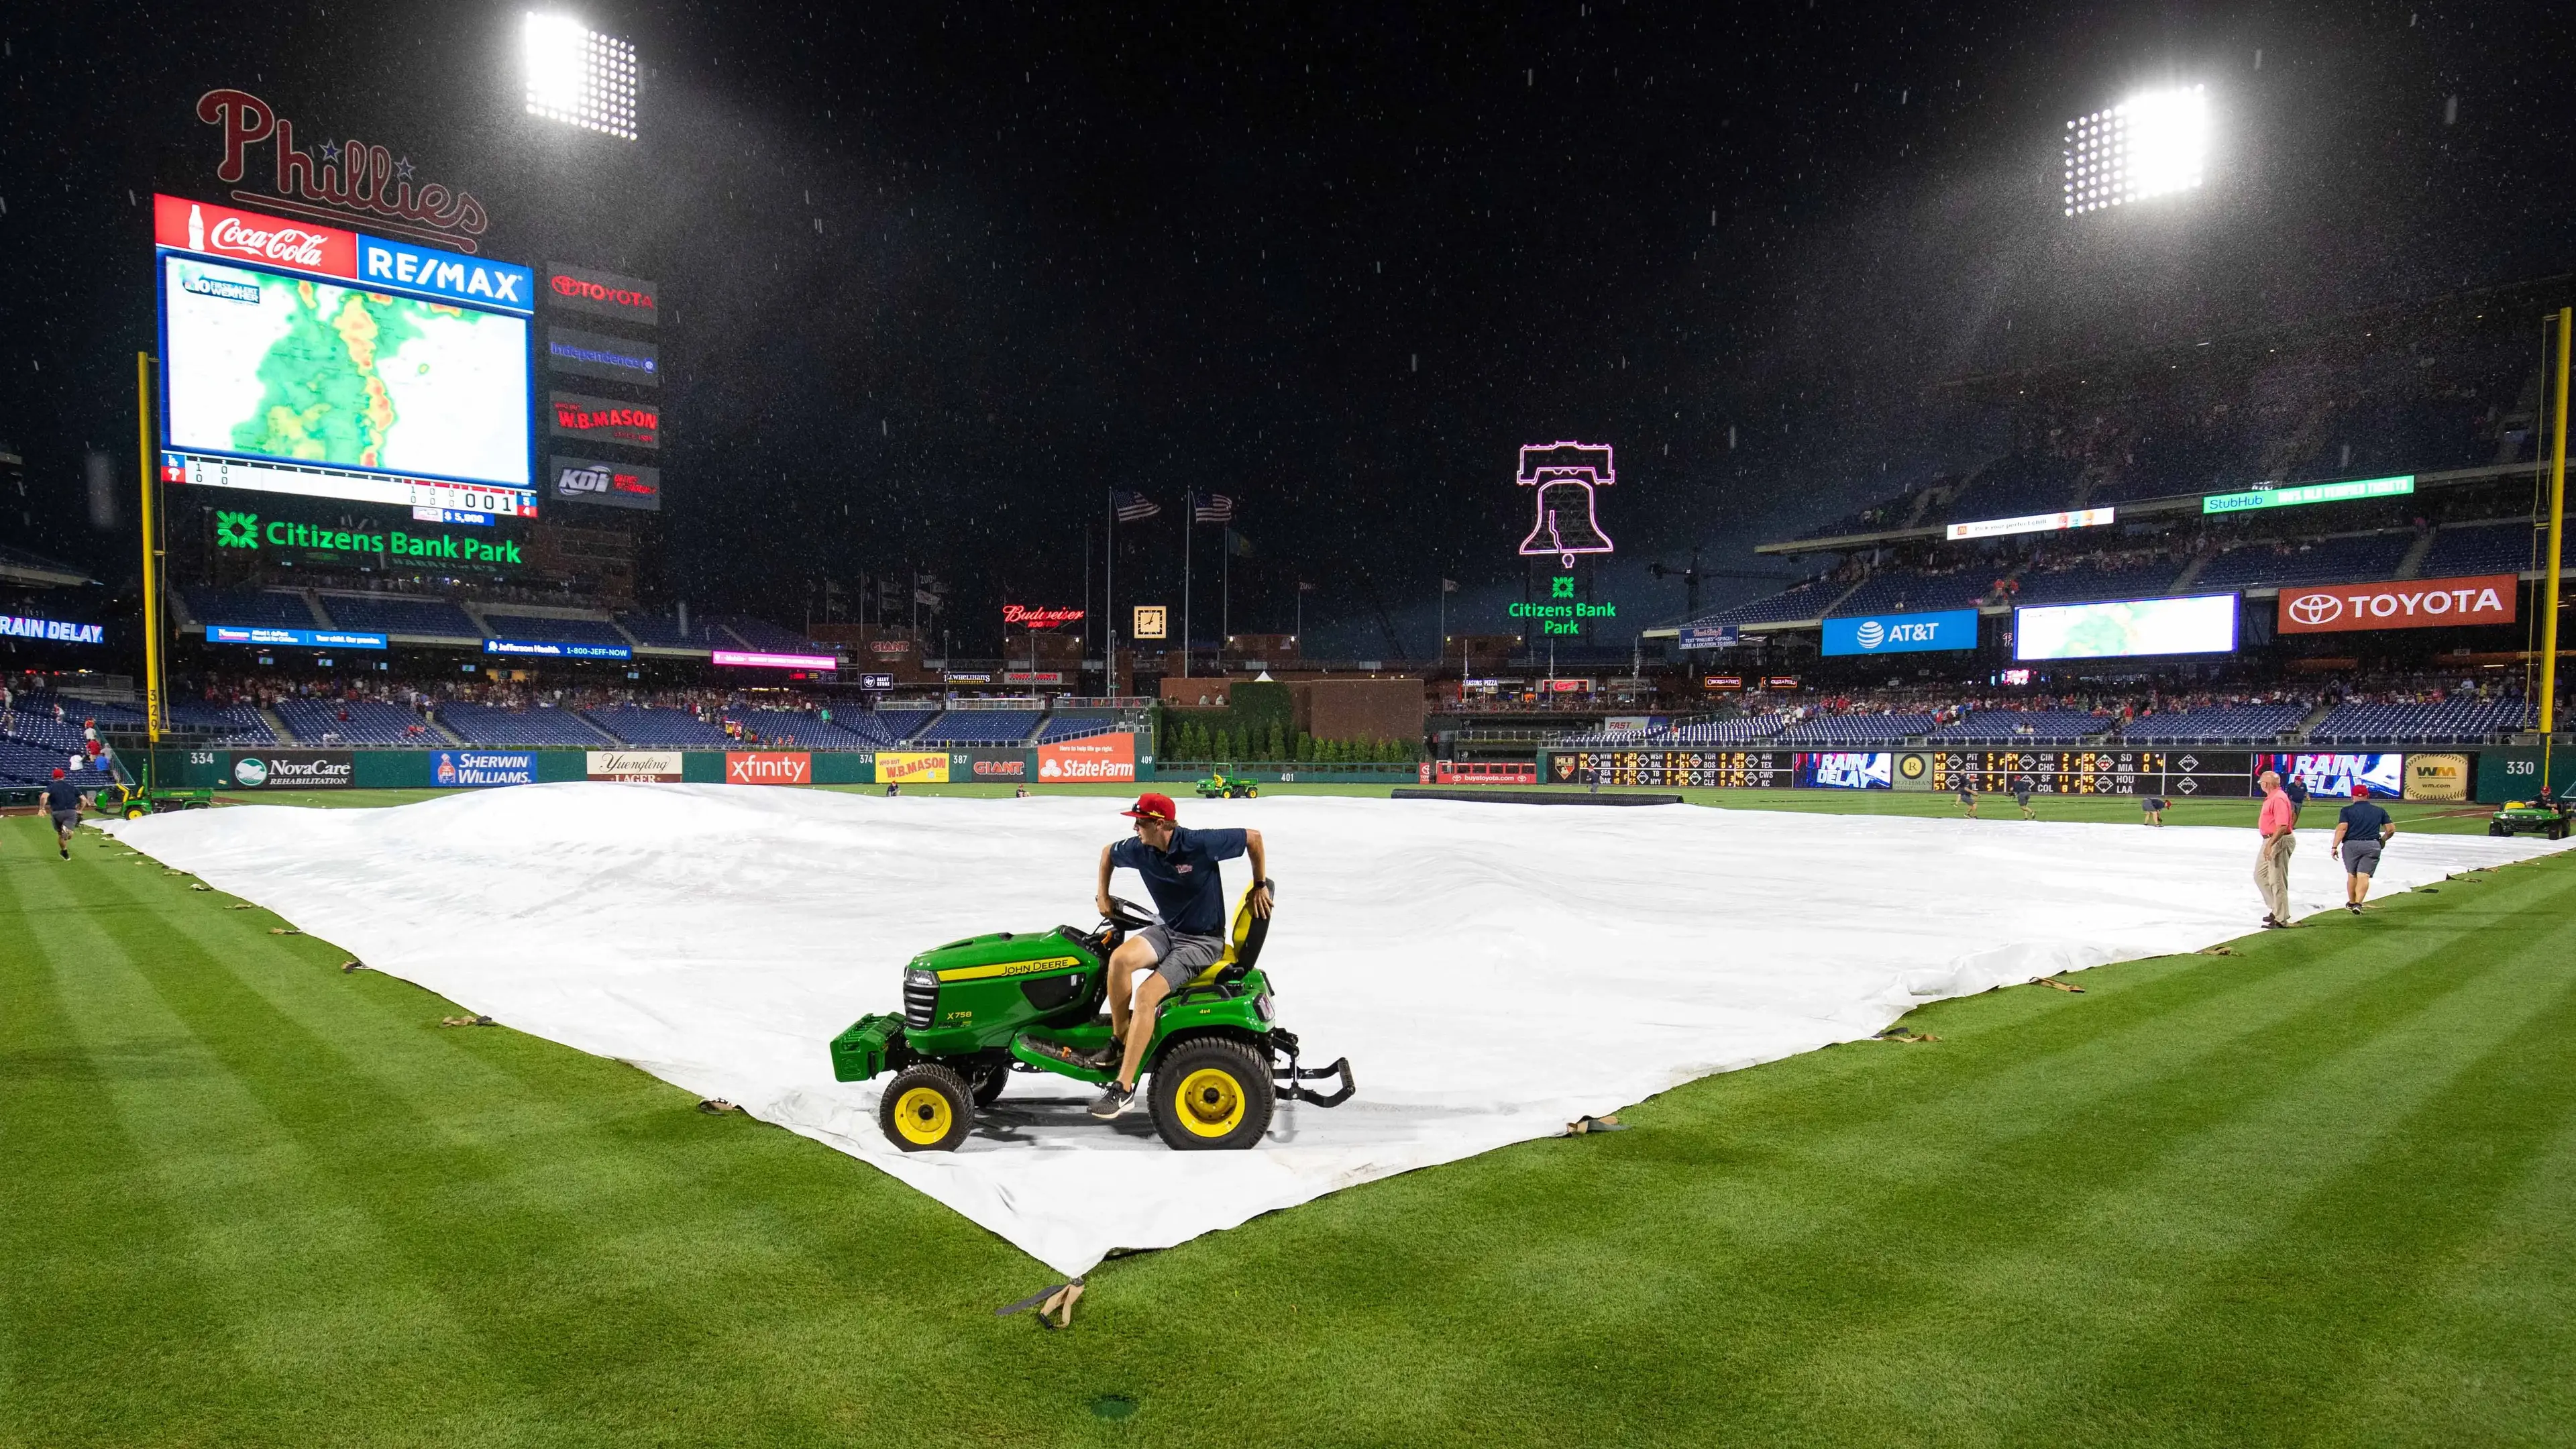 Jul 17, 2019; Philadelphia, PA, USA; Philadelphia Phillies grounds crew cover the infield during a rain delay in the third inning against the Los Angeles Dodgers at Citizens Bank Park. Mandatory Credit: Bill Streicher-USA TODAY Sports / Bill Streicher-USA TODAY Sports